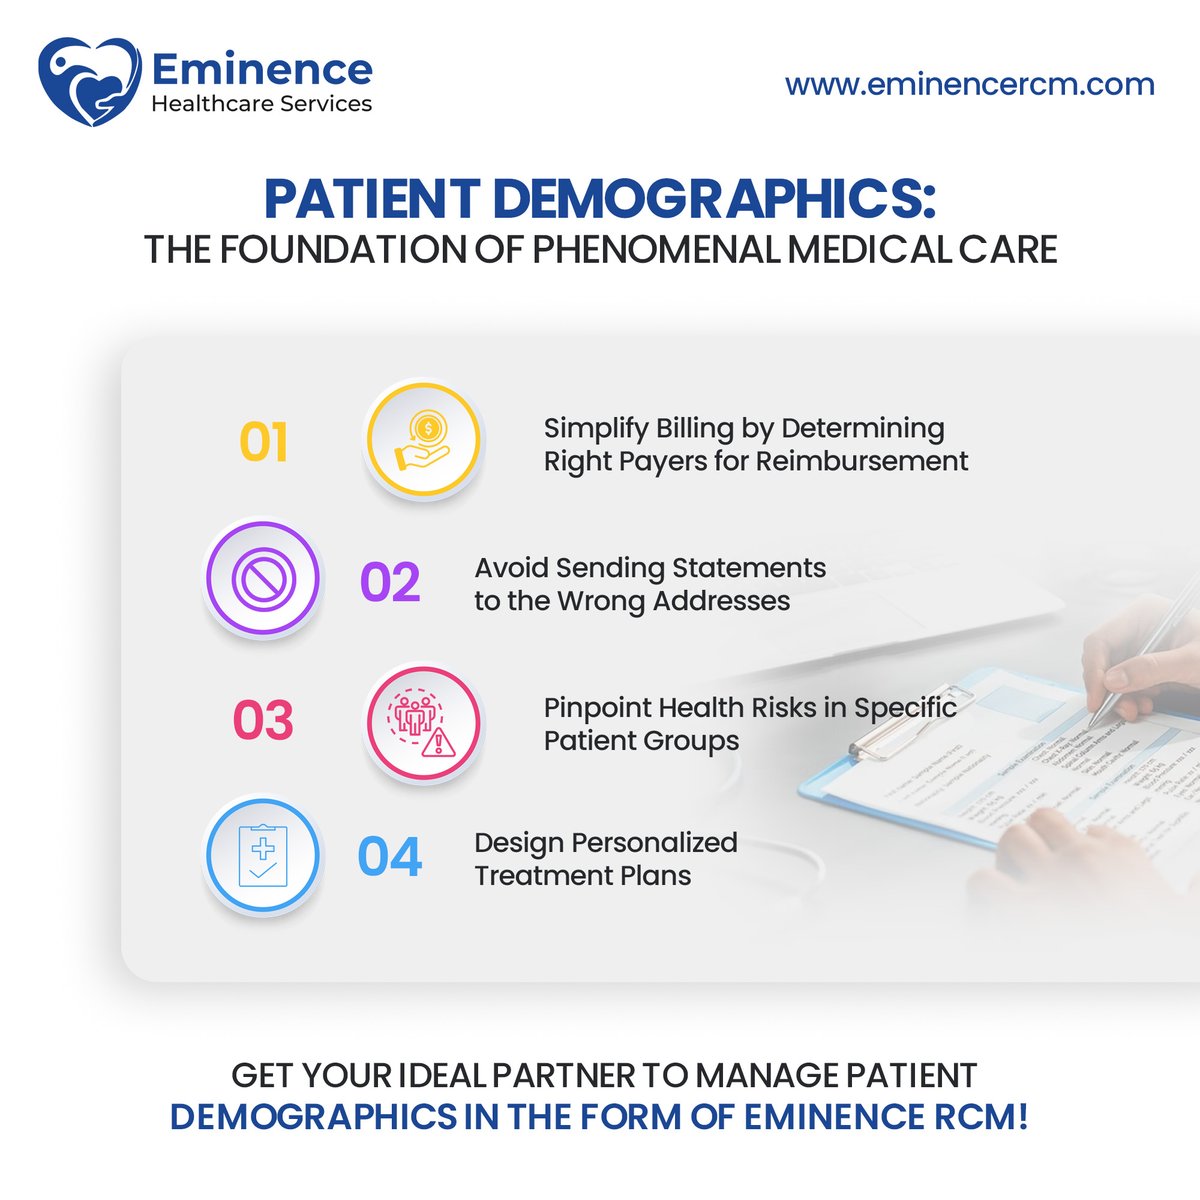 According to Black Book Research about 35% of denied claims result from inaccurate patient identification. 
Looking for an Ideal Outsourcing Partner for Patient Demographics Service?
Eminence RCM is your answer!

#EminenceRCM #Healthcare #MedicalBilling #RevenueCycleManagement